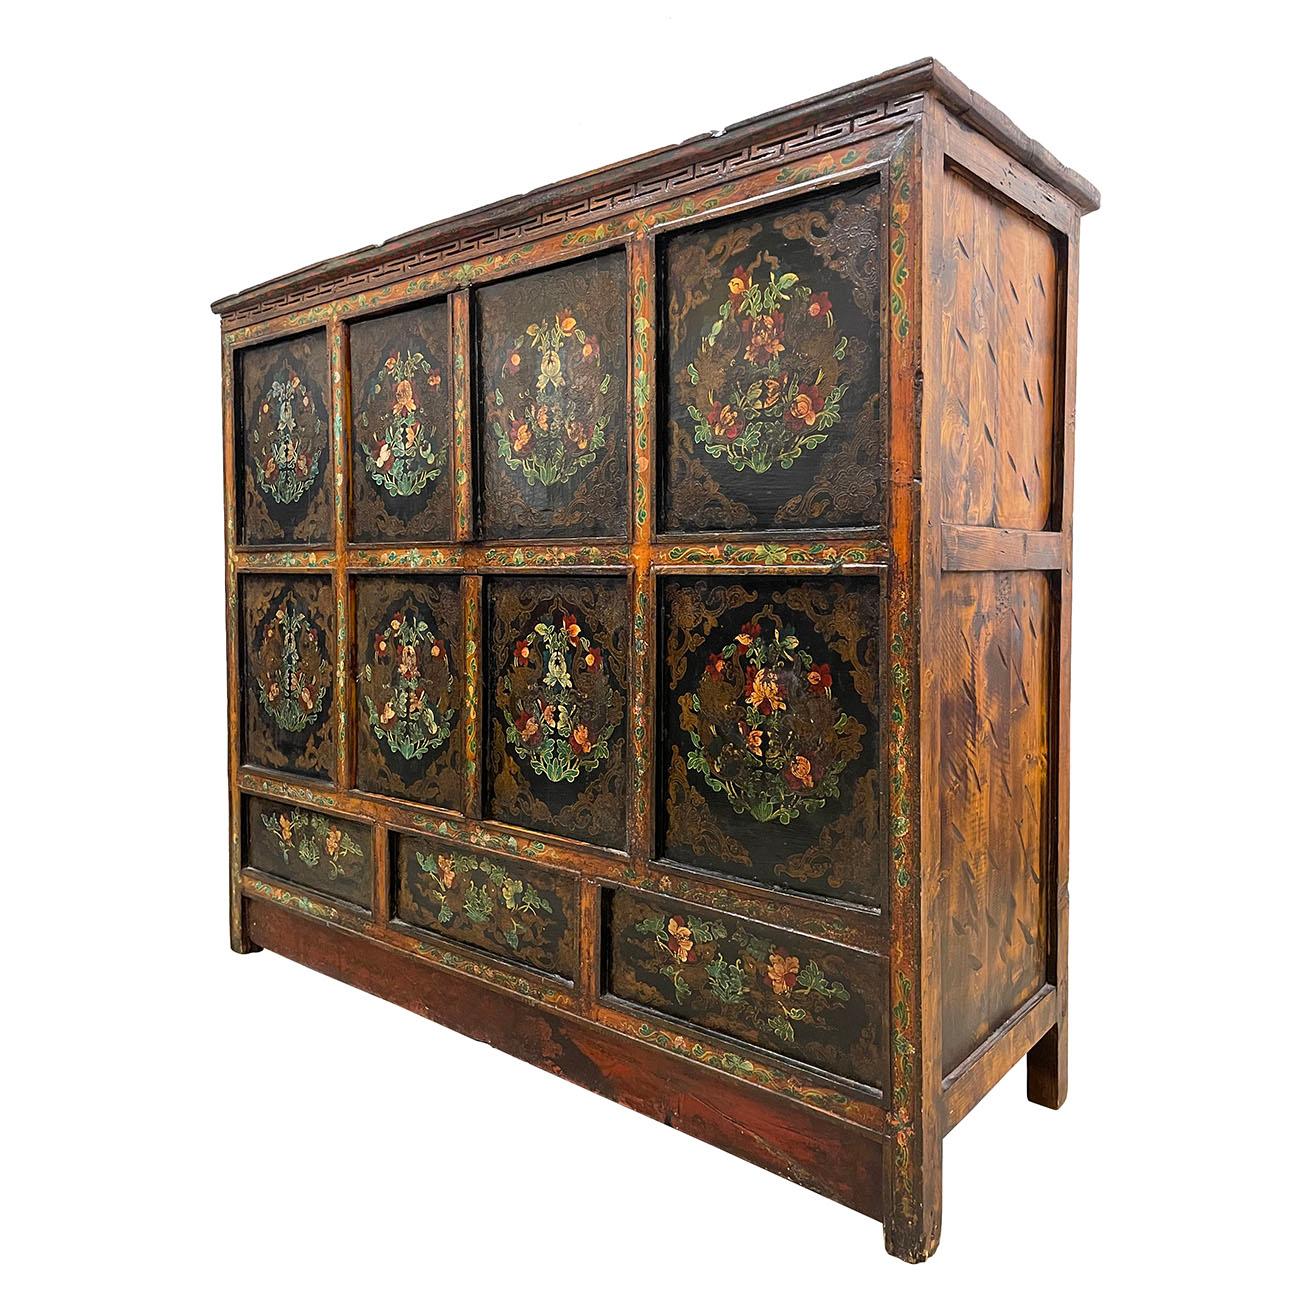 This Antique Tibetan Painted Cabinet is 100% hand made and hand painted using mineral painting which last the paint a much longer time. You can see some of the finish has already lost. This Cabinet has 2 double removable doors compartment on the